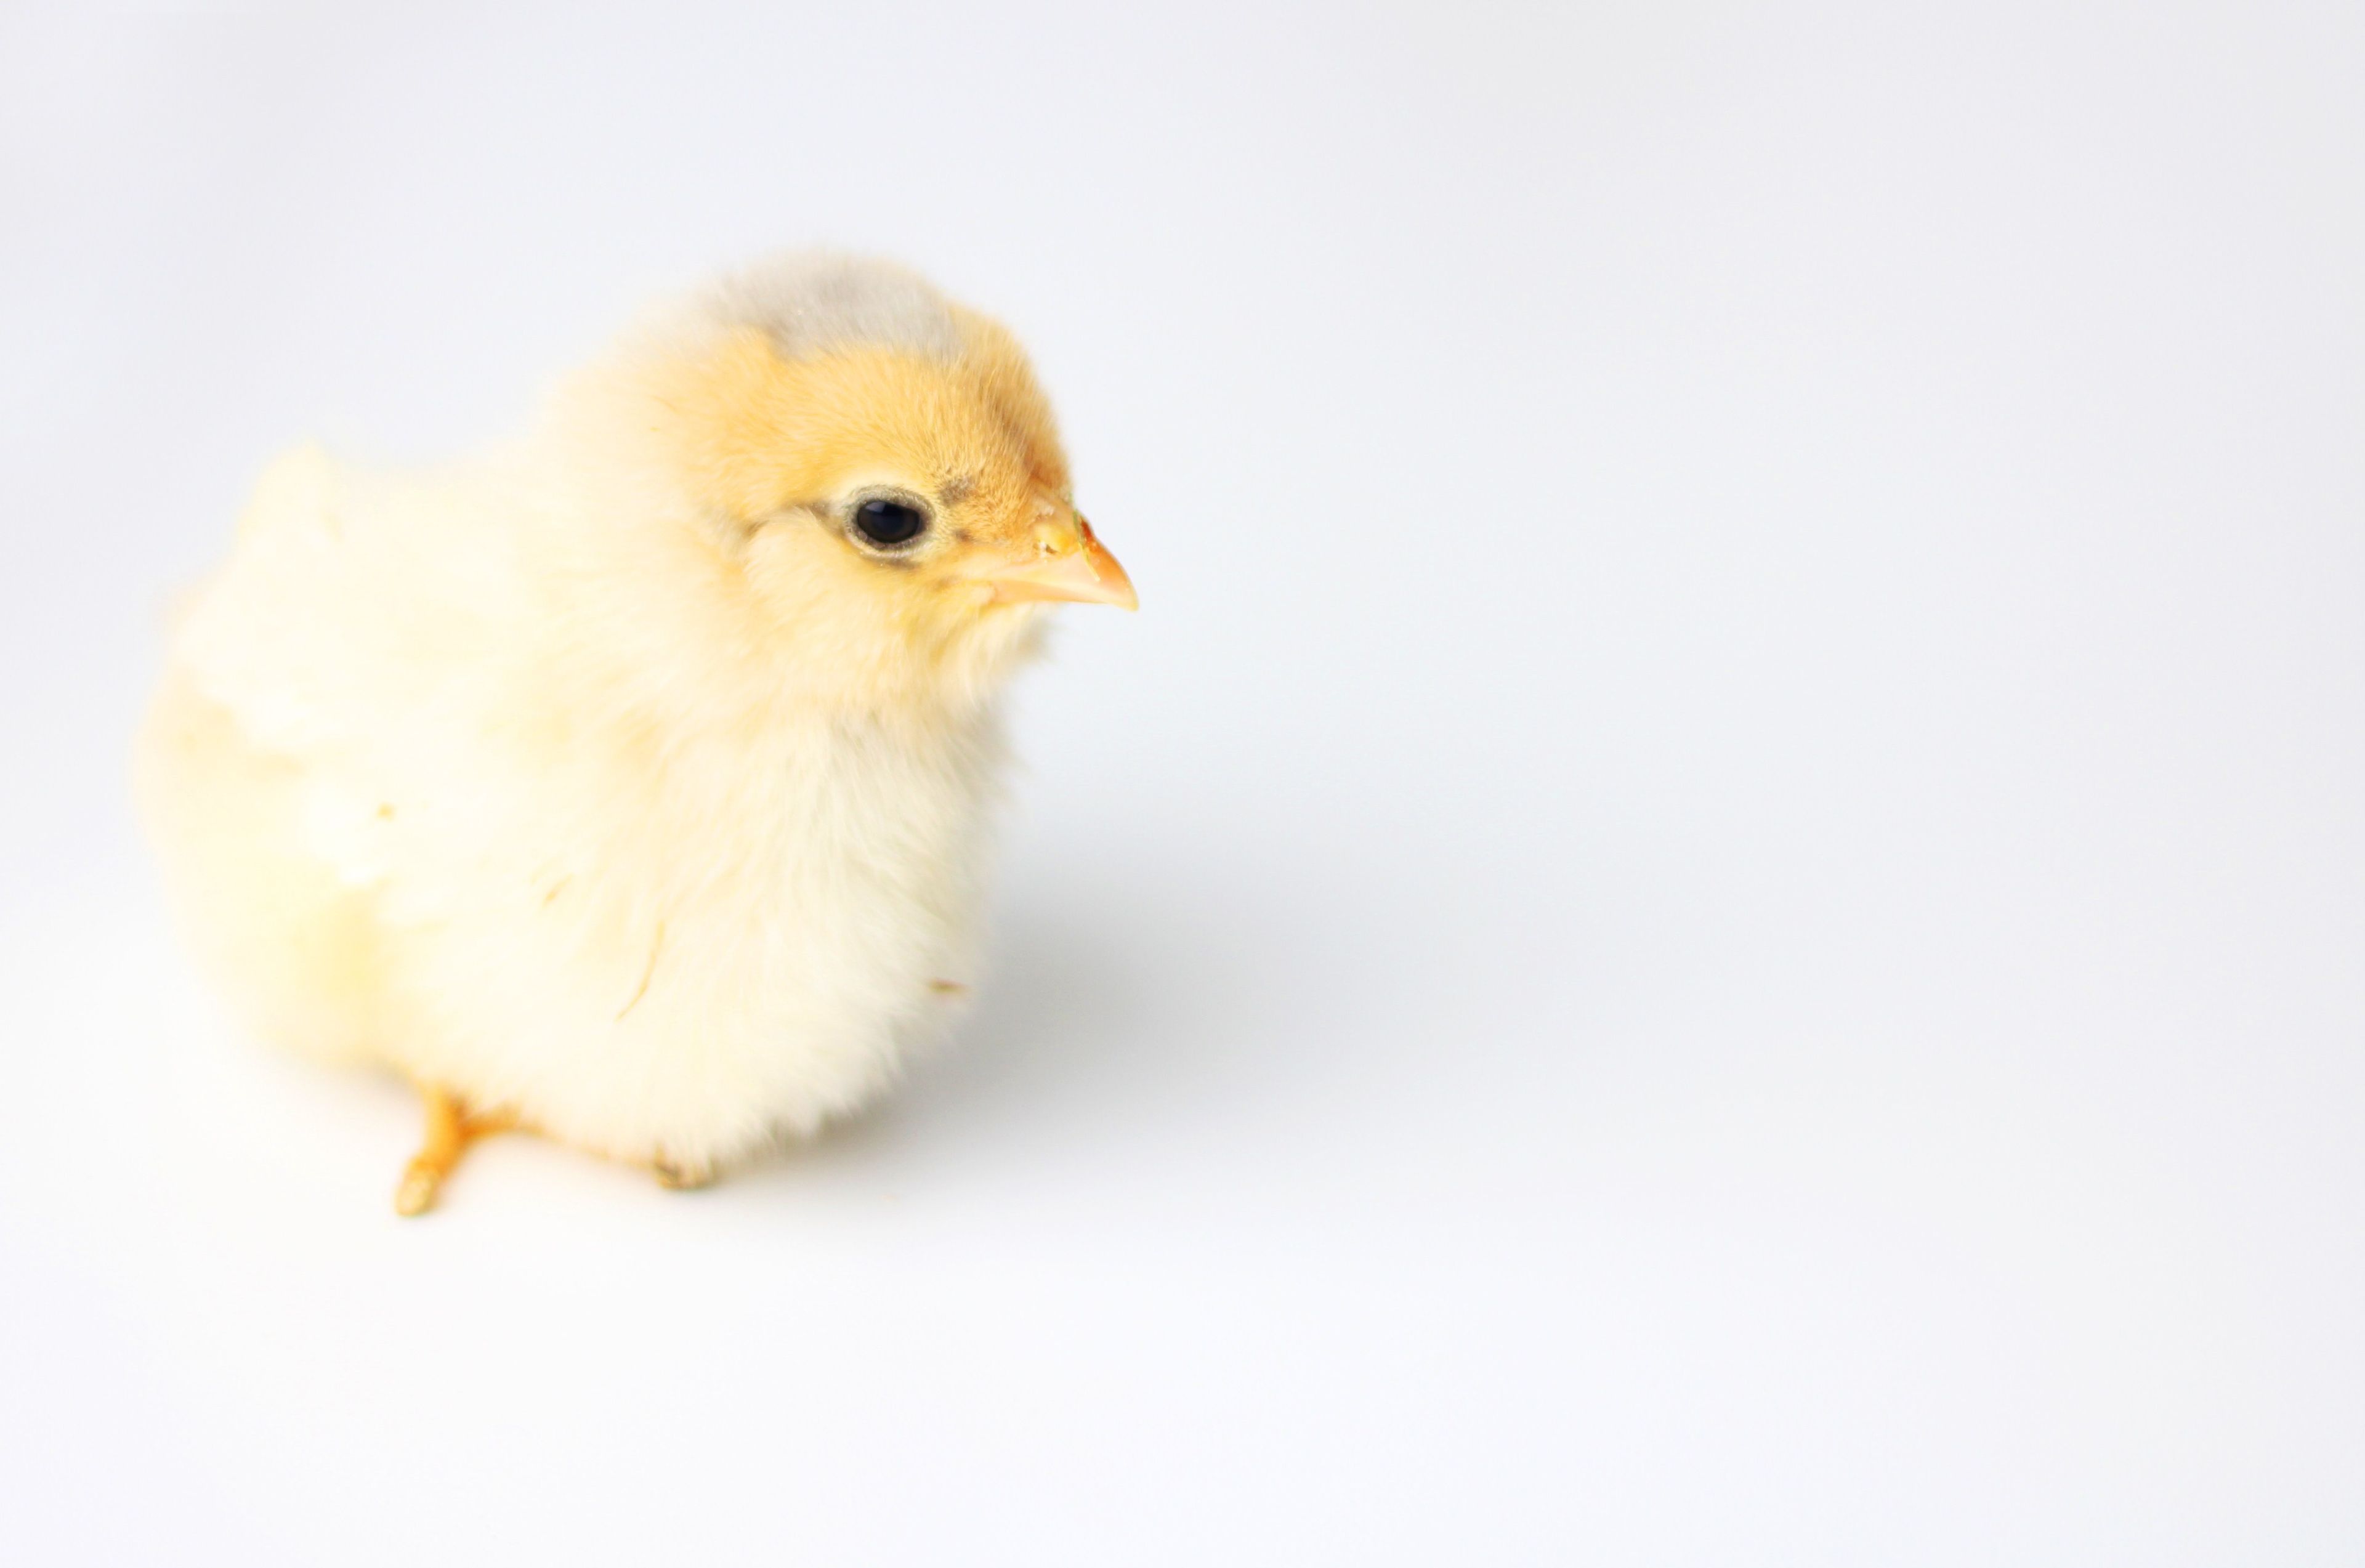 A portrait of a yellow baby chick.